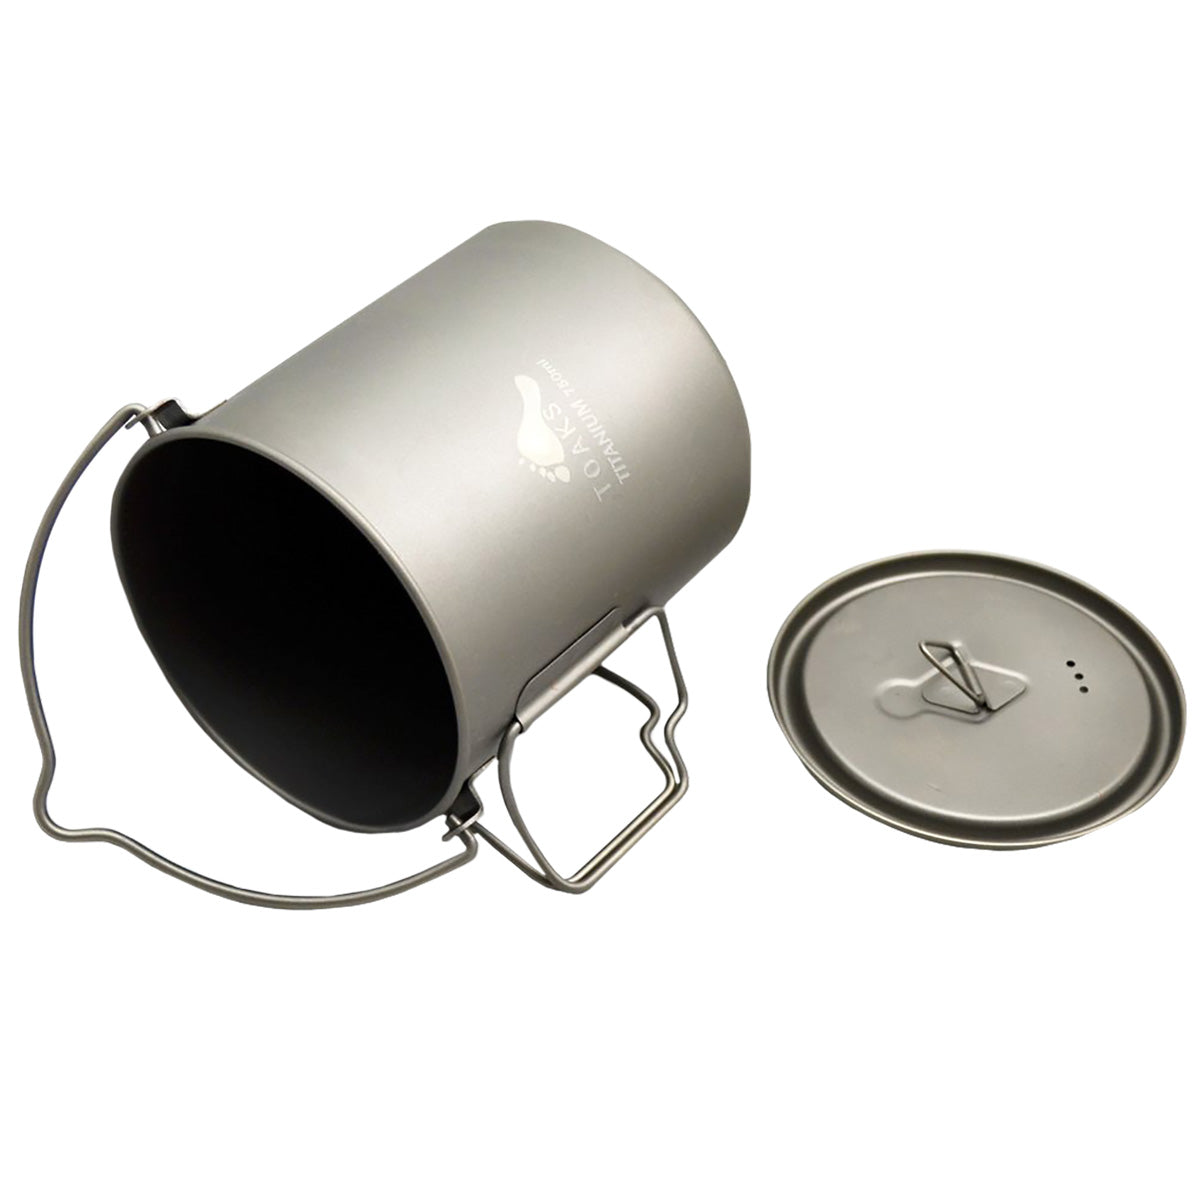 TOAKS 750ml Ultralight Titanium Camping Cook Pot with Bail Handle and Lid TOAKS